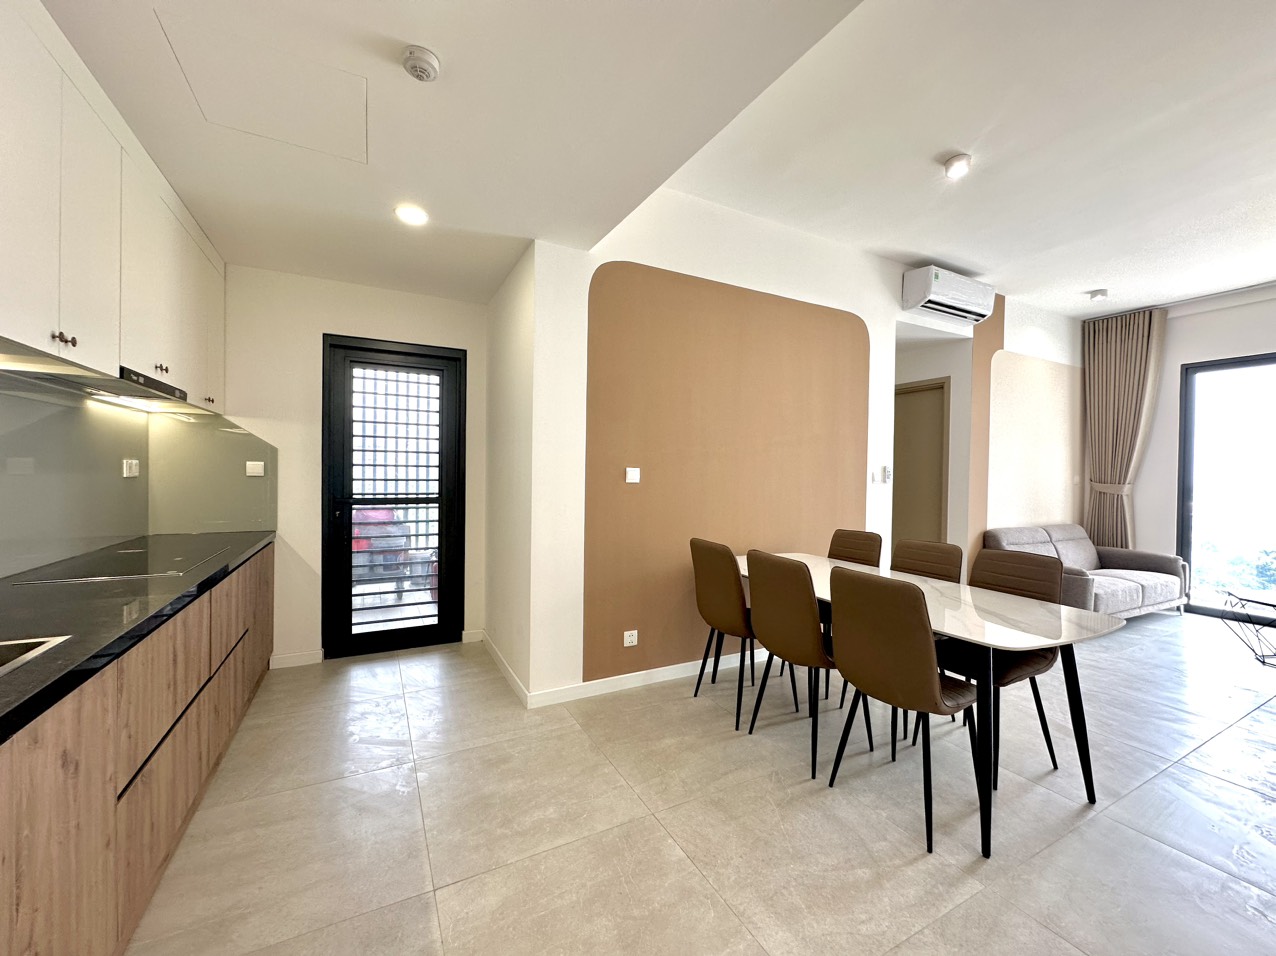 Brand new apartment for rent in Antonia